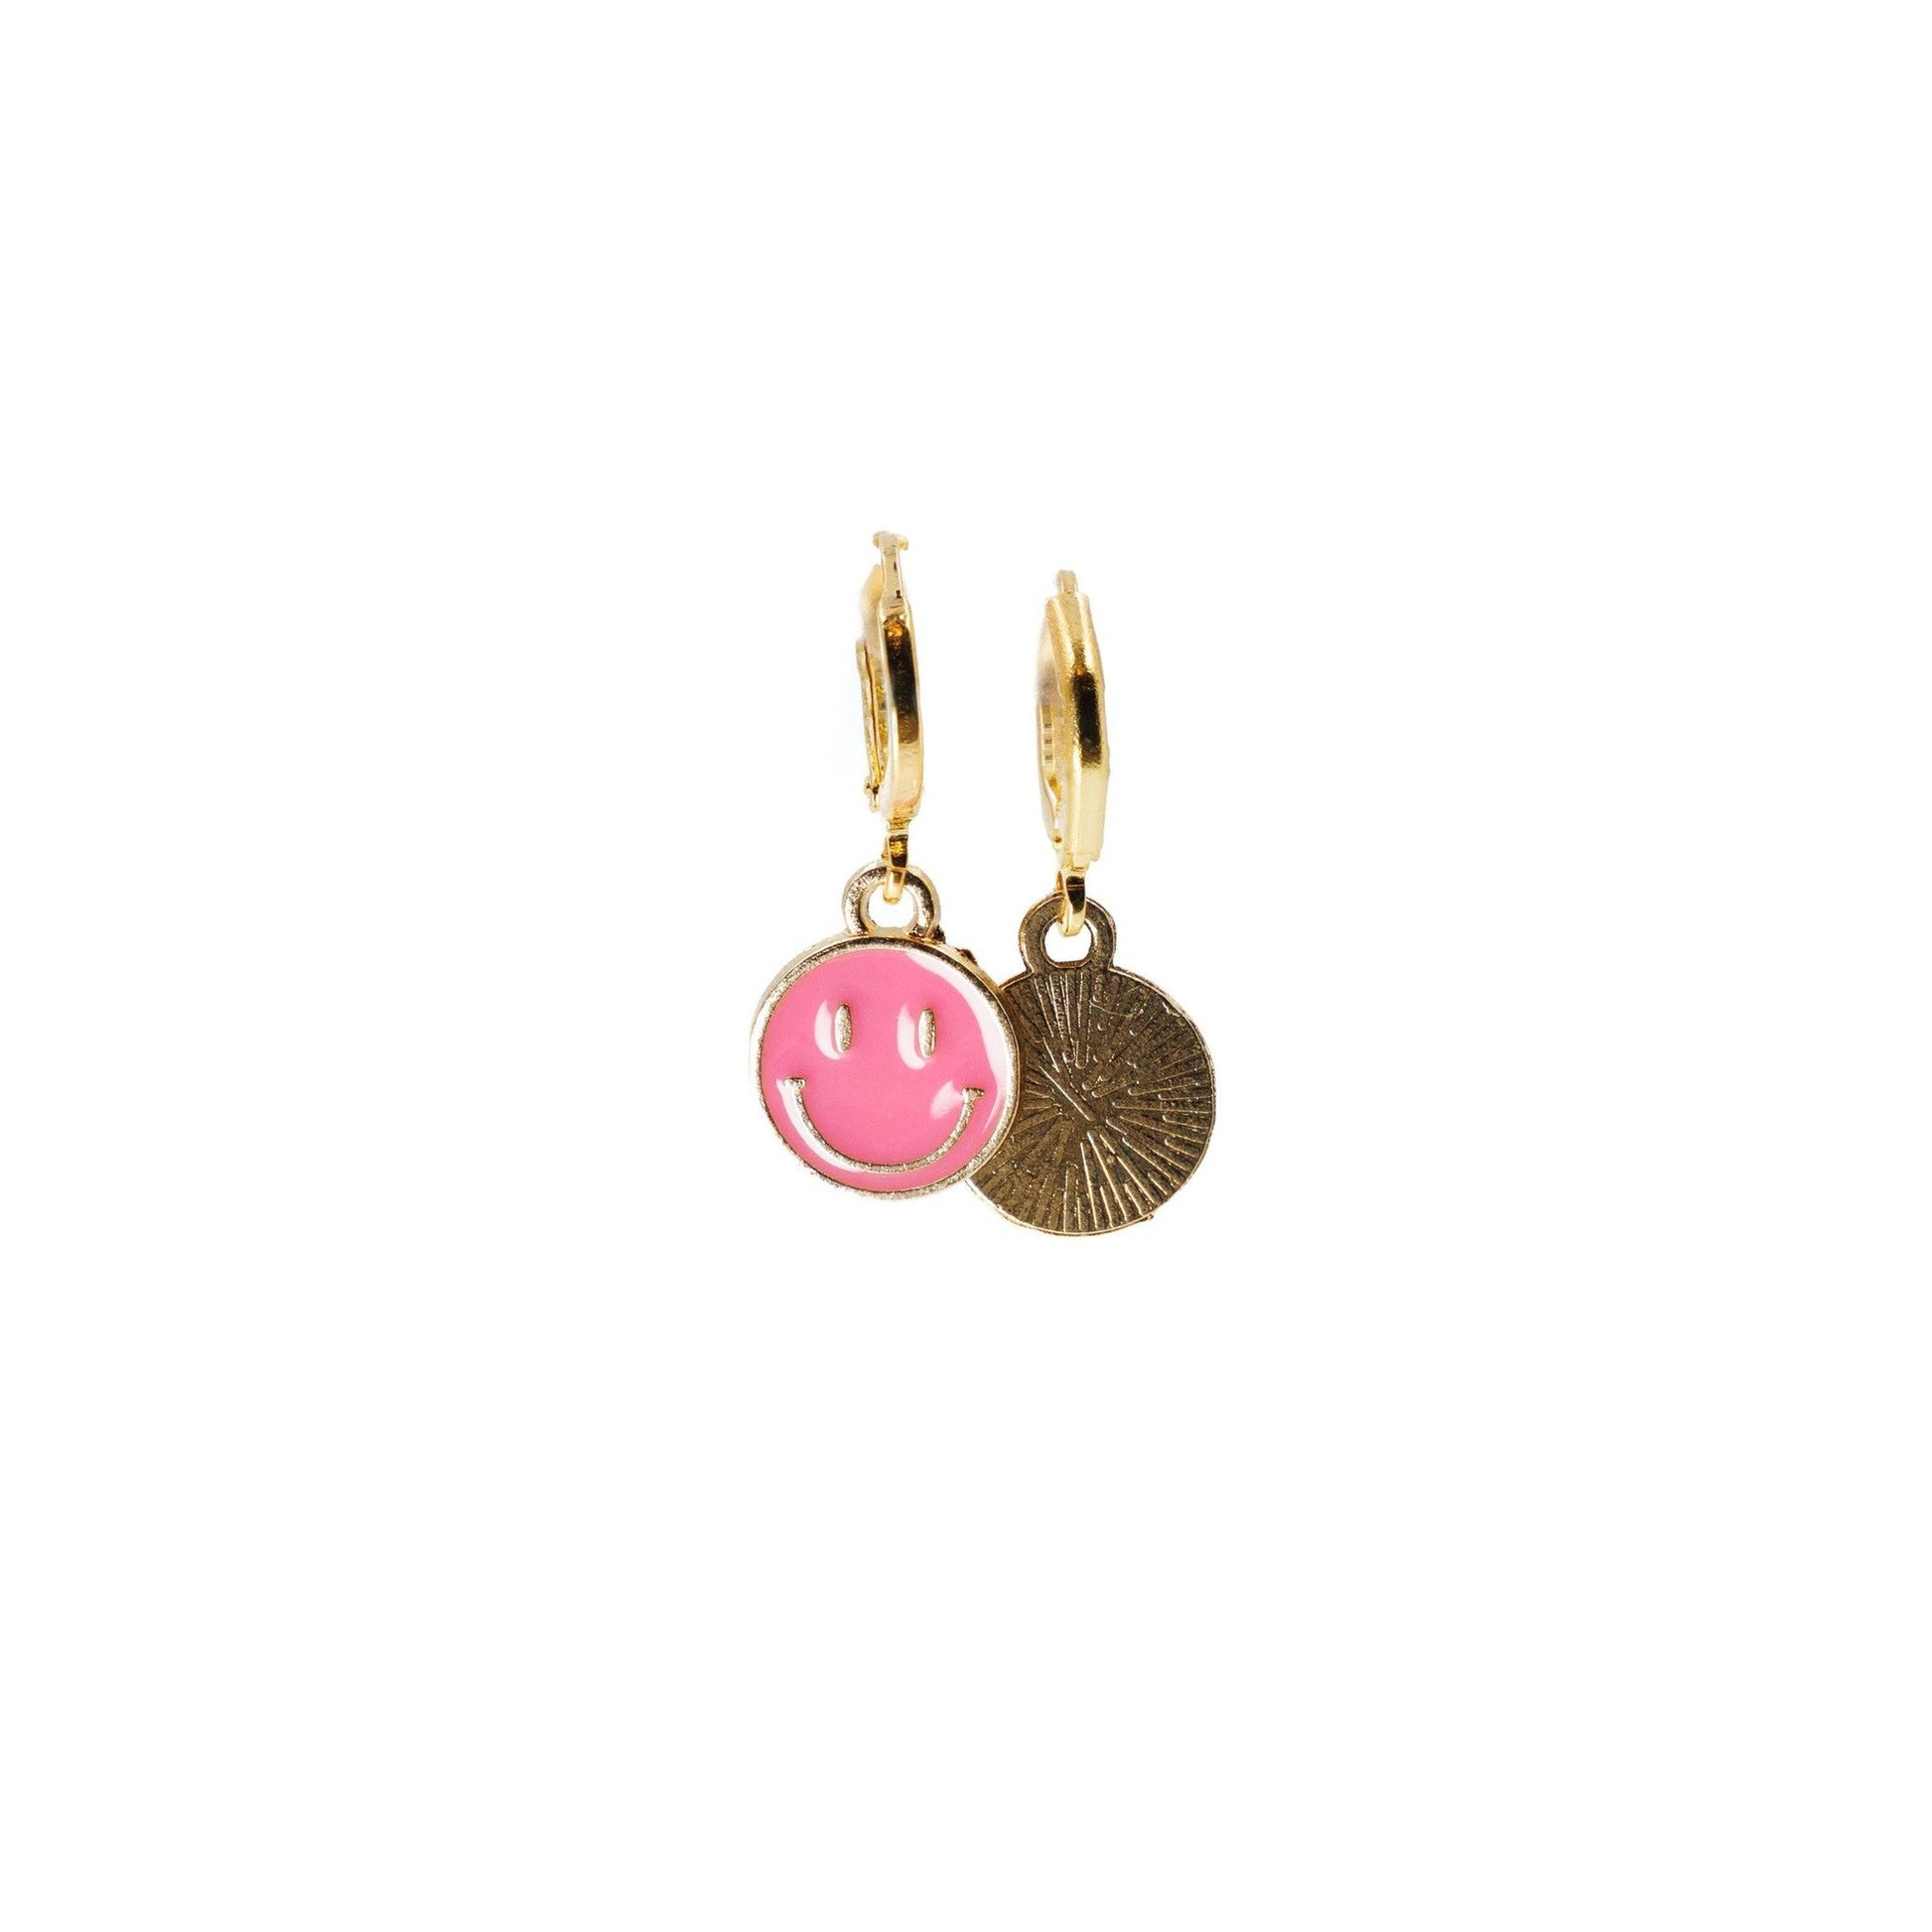 Retro '80s-'90s Dual Happy Face Charm Earrings | 4 Color Options | Yellow, Black, White, Pink